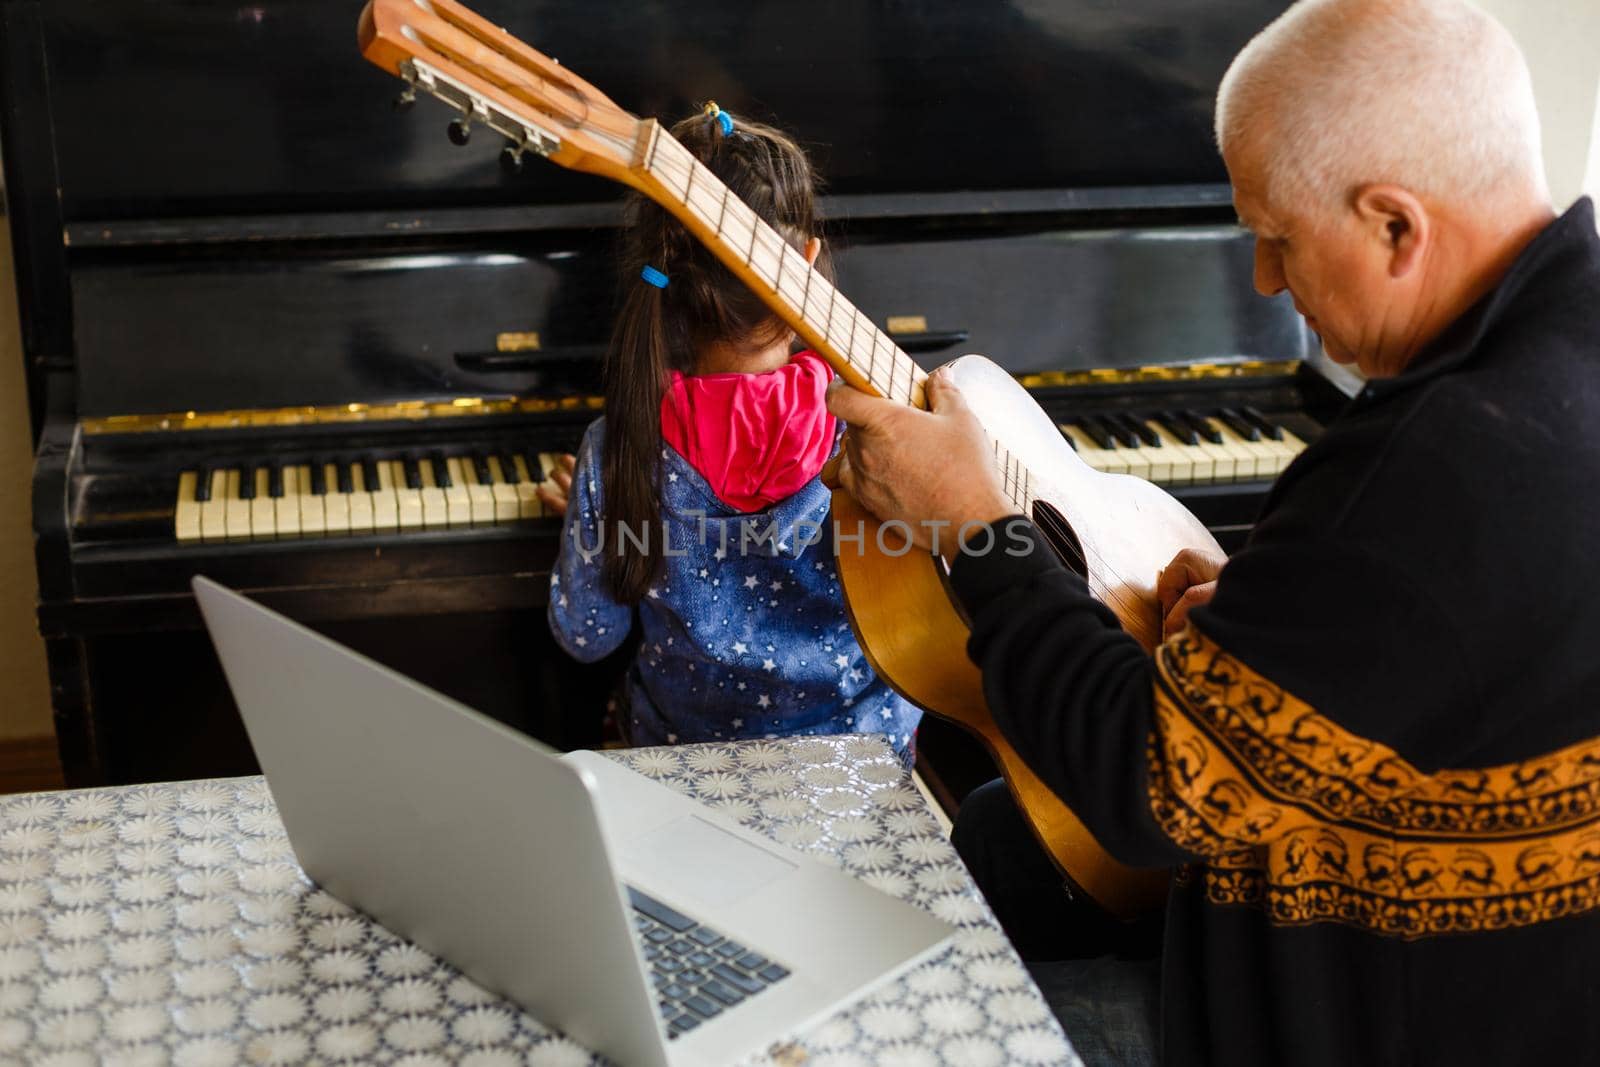 little girl plays piano together with grandfather, learning online on a laptop